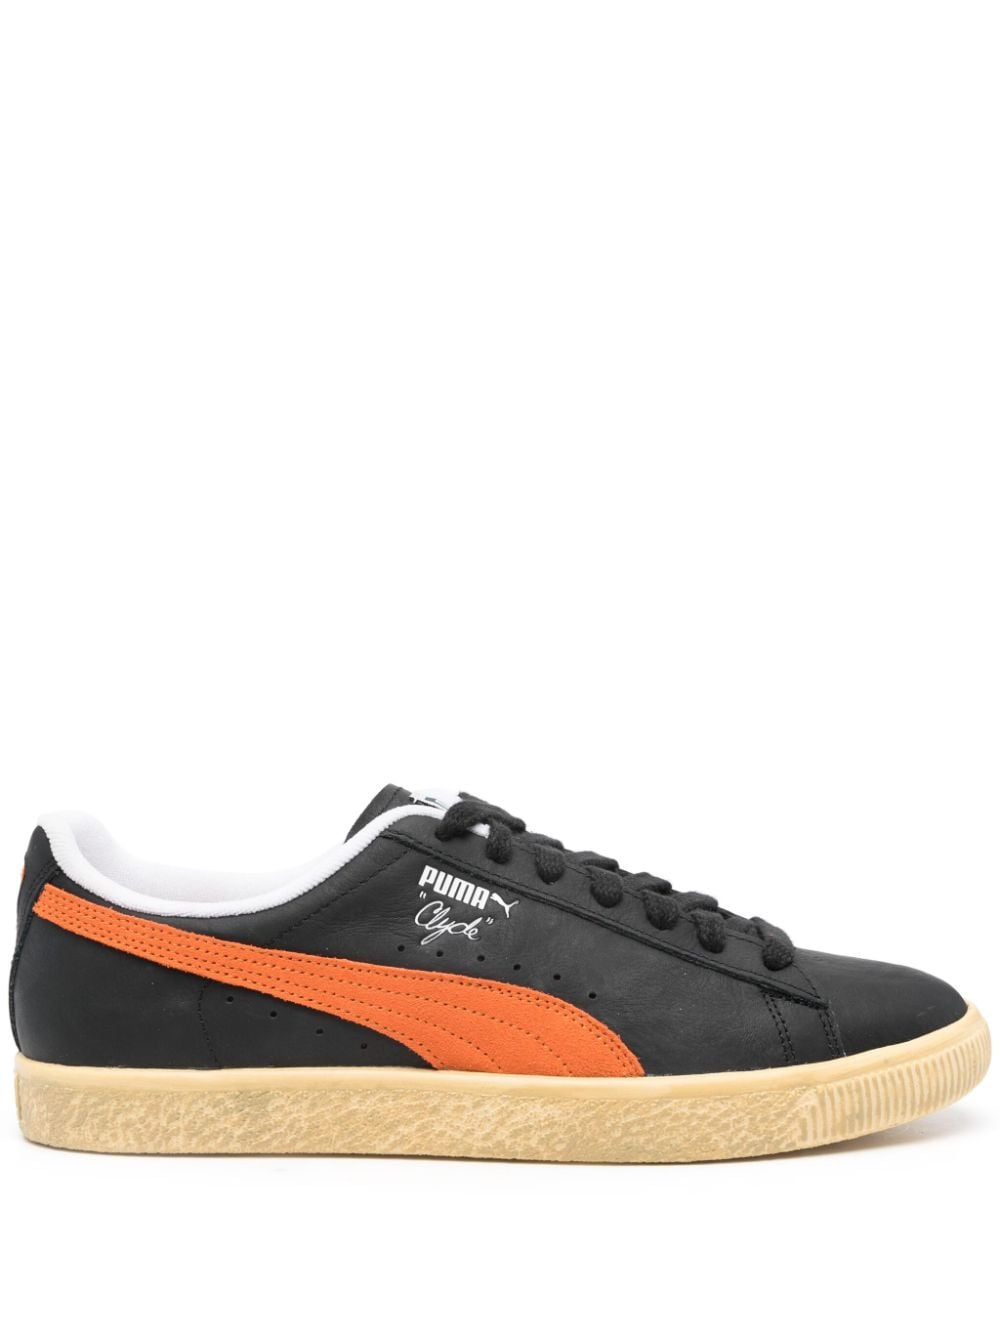 PUMA Clyde Vintage Leather Sneakers - Farfetch